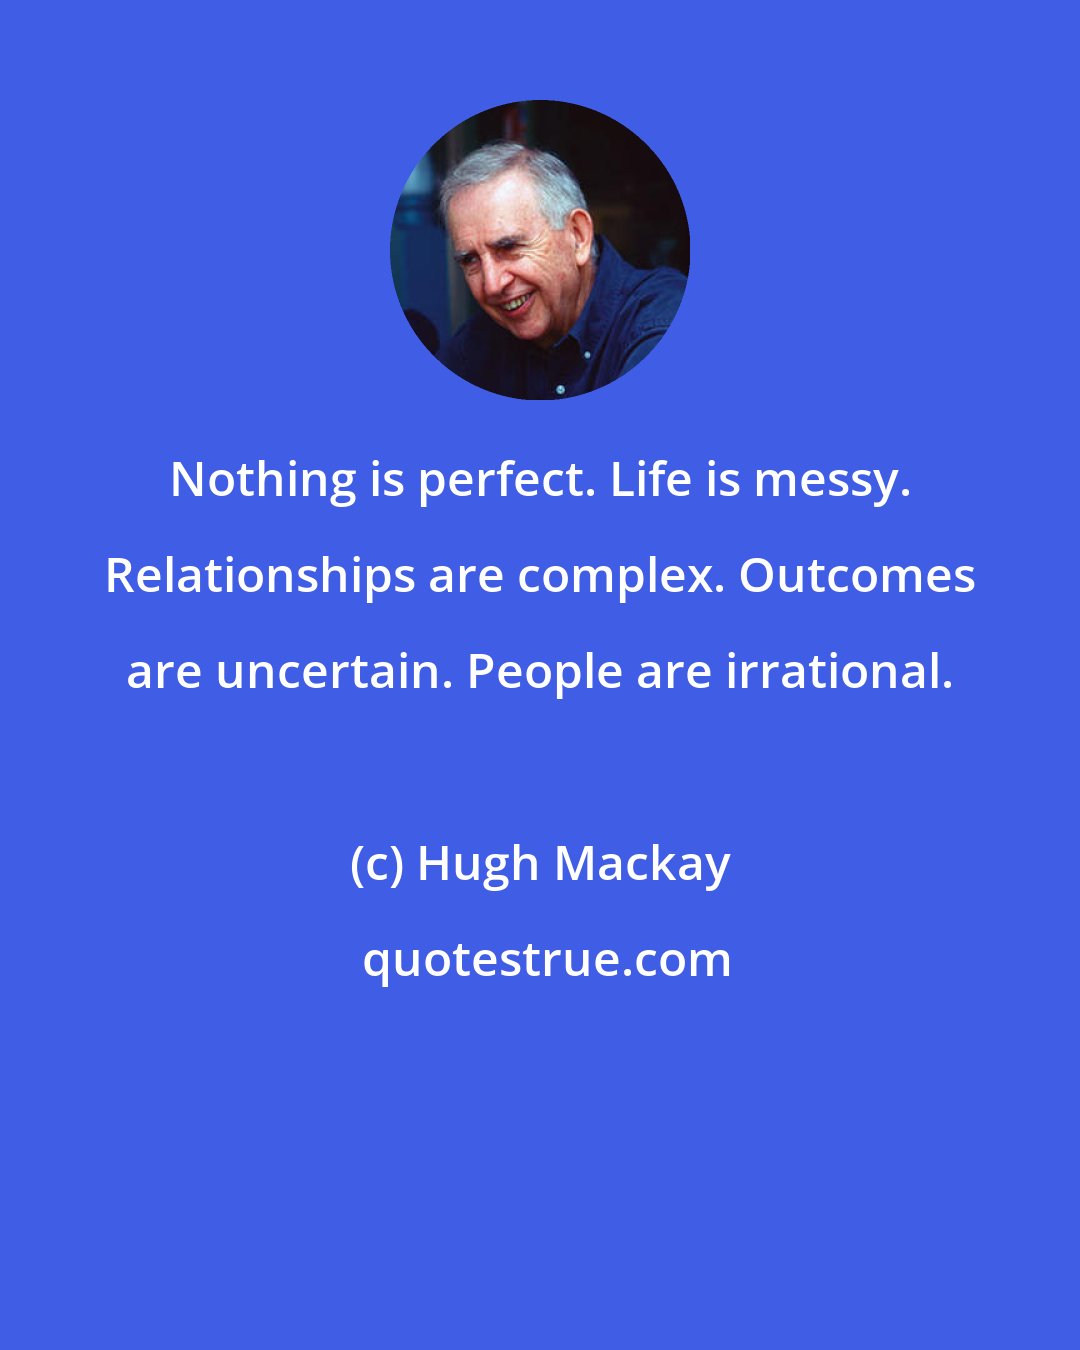 Hugh Mackay: Nothing is perfect. Life is messy. Relationships are complex. Outcomes are uncertain. People are irrational.